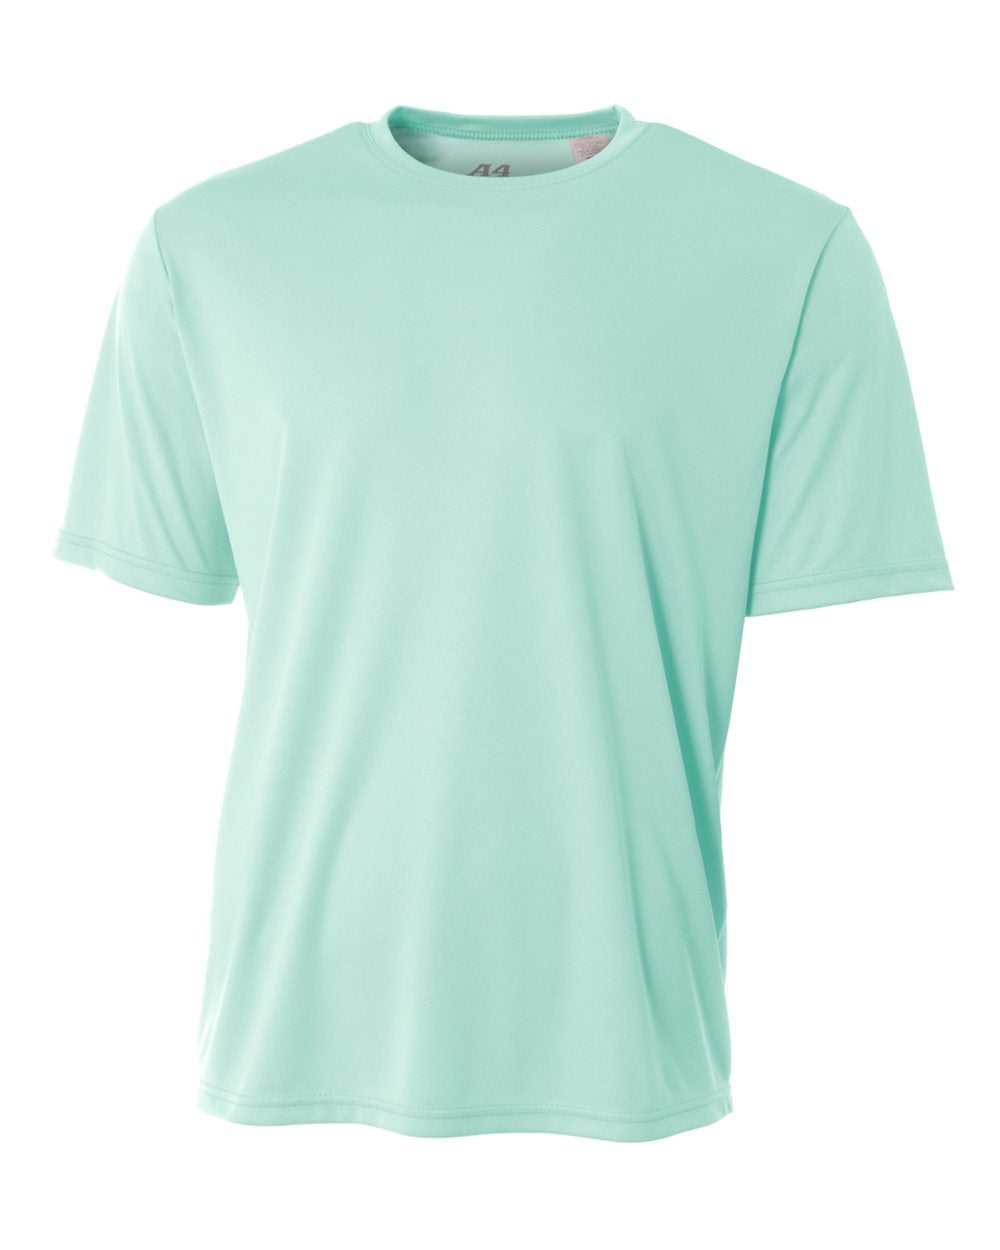 A4 NB3142 Youth Cooling Performance Crew - Pastel Mint - HIT a Double